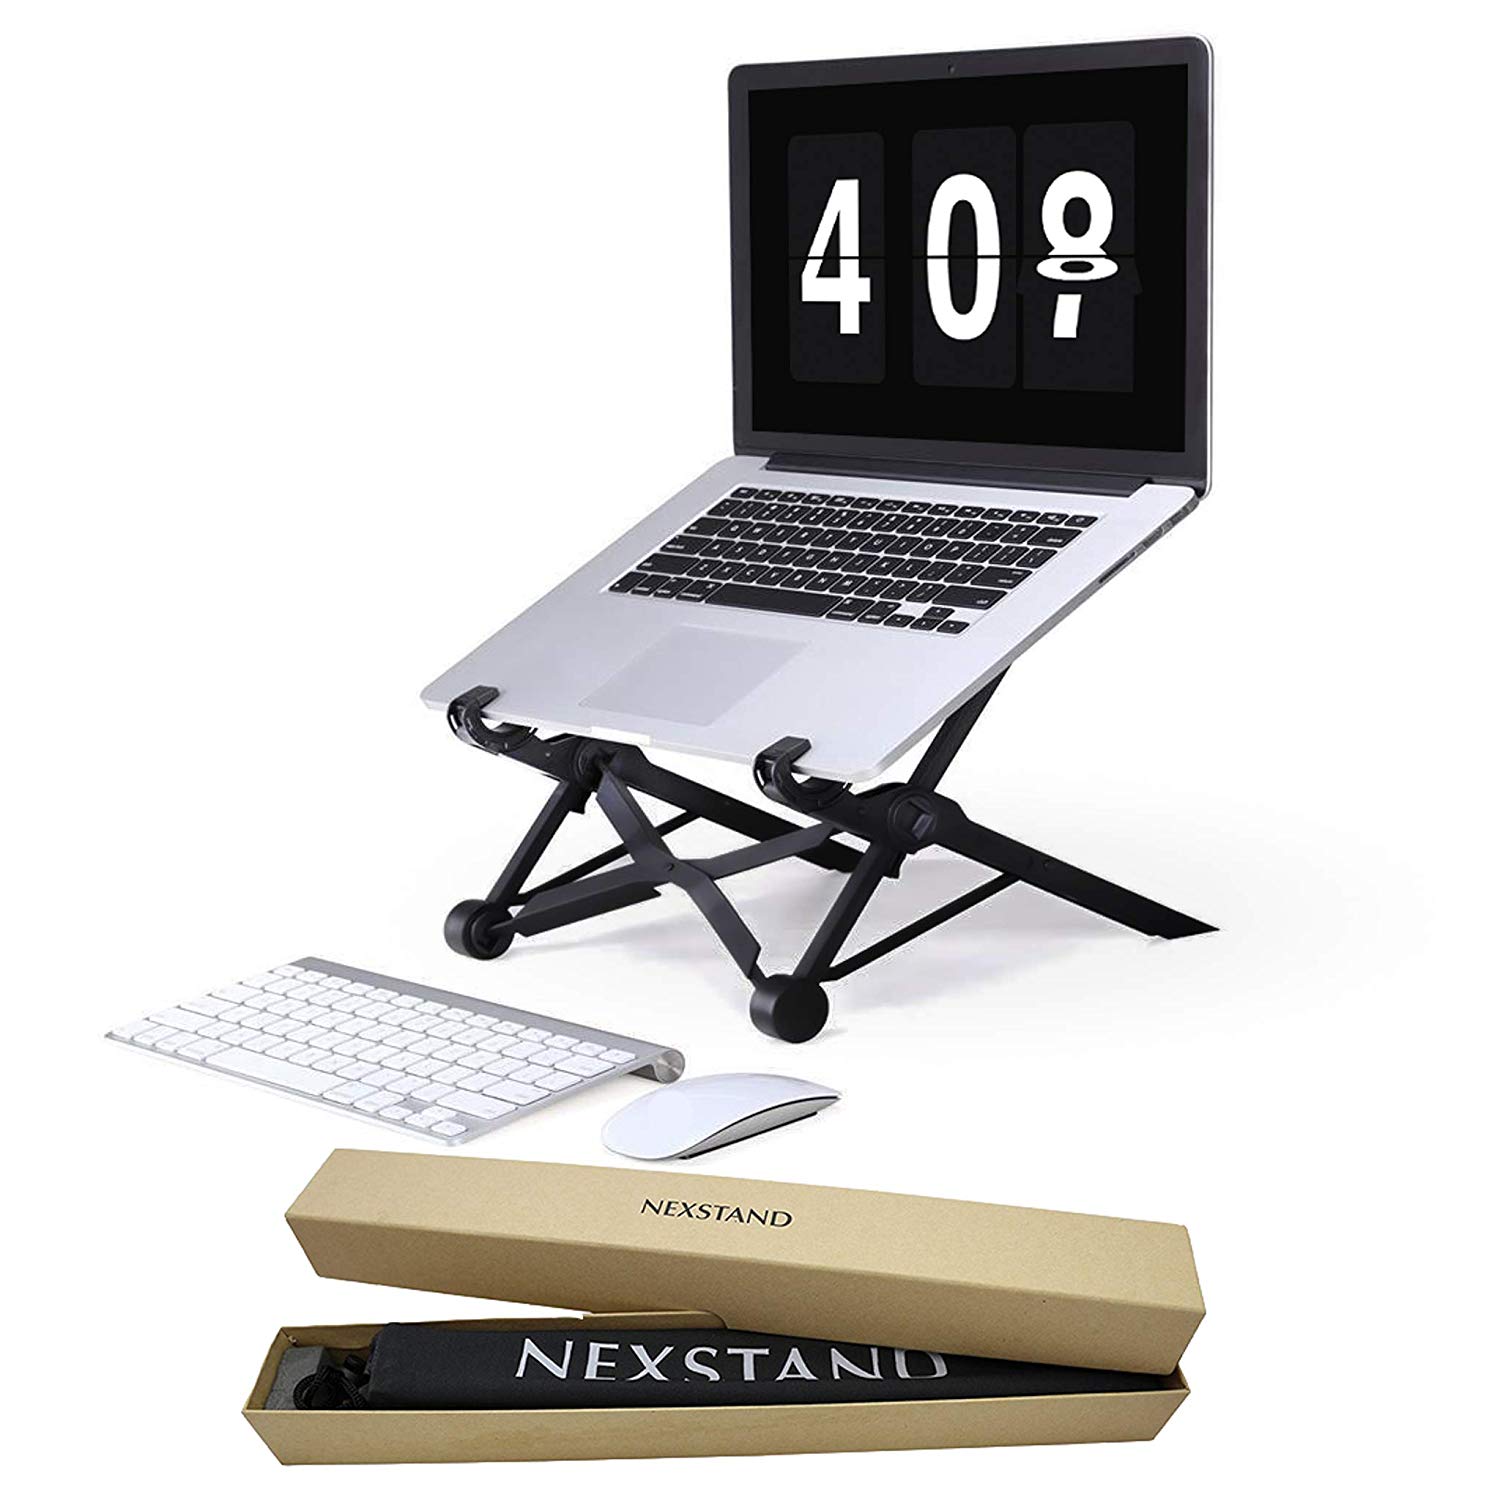 FDN Life Magazine - Laptop Stand for Digital Nomad, Freelancer, Remote Worker or Location Independent - From Amazon.com